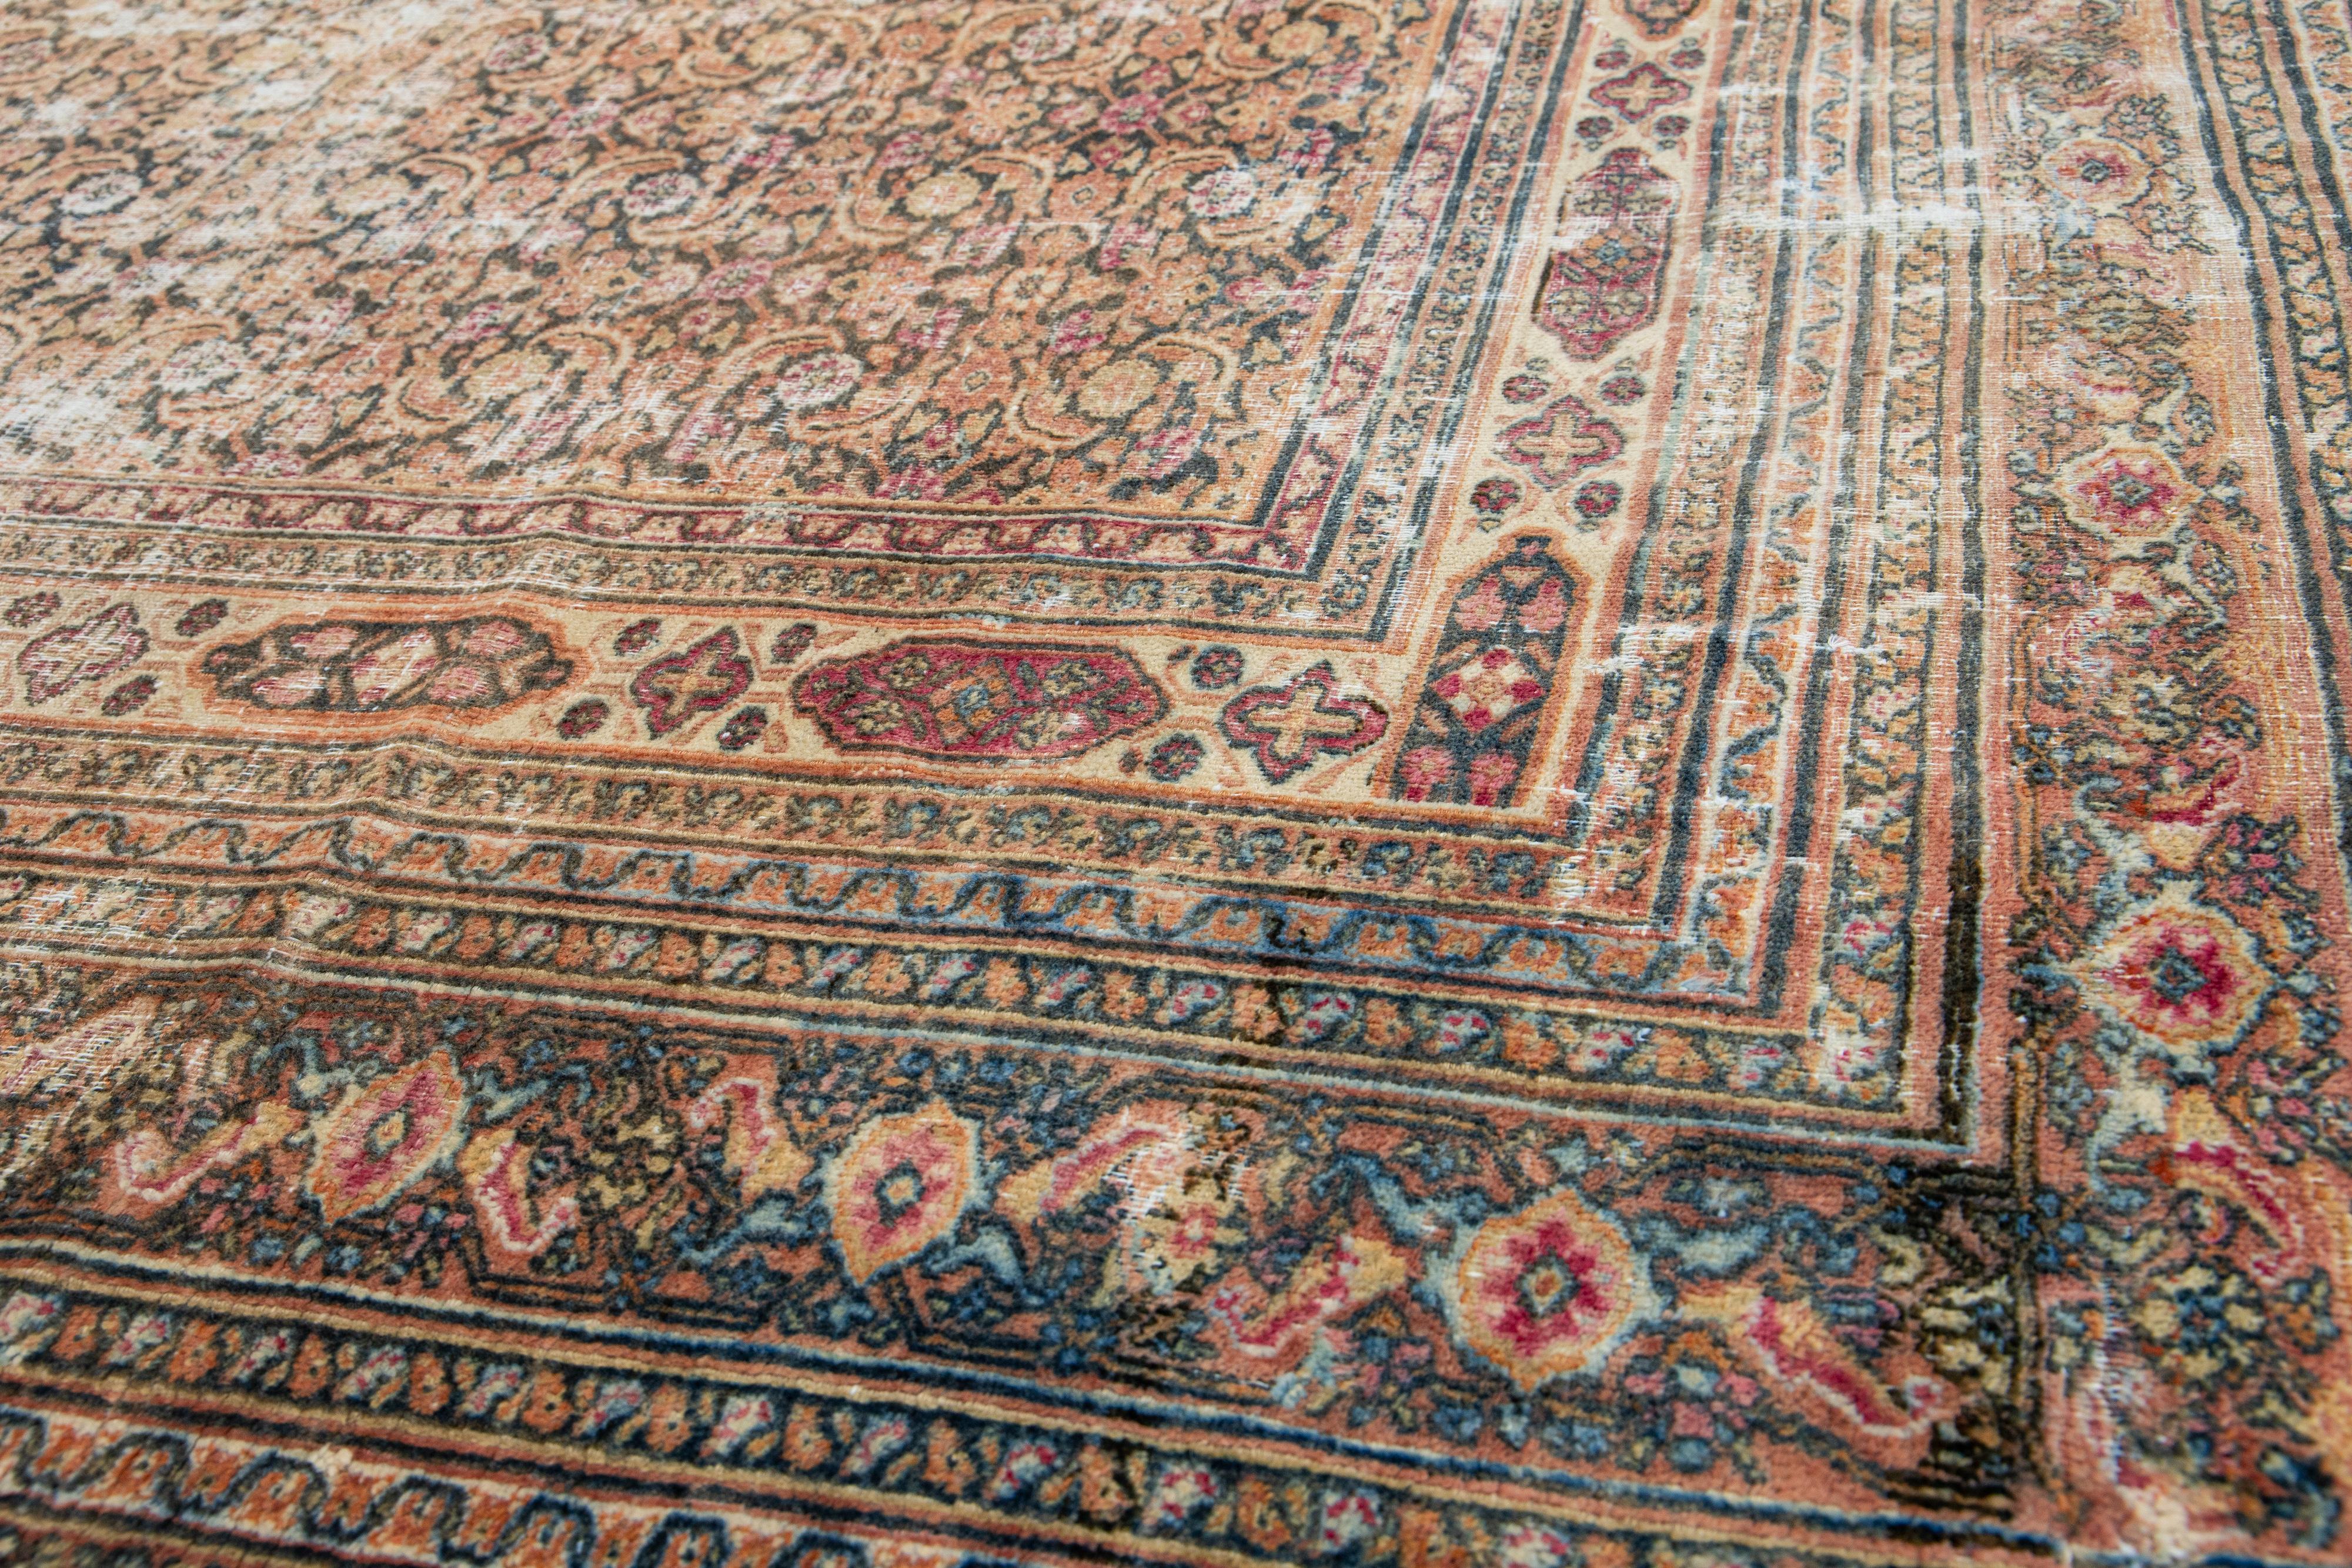  1900s Antique Wool Rug Persian Tabriz In Rust With Floral Pattern  For Sale 4